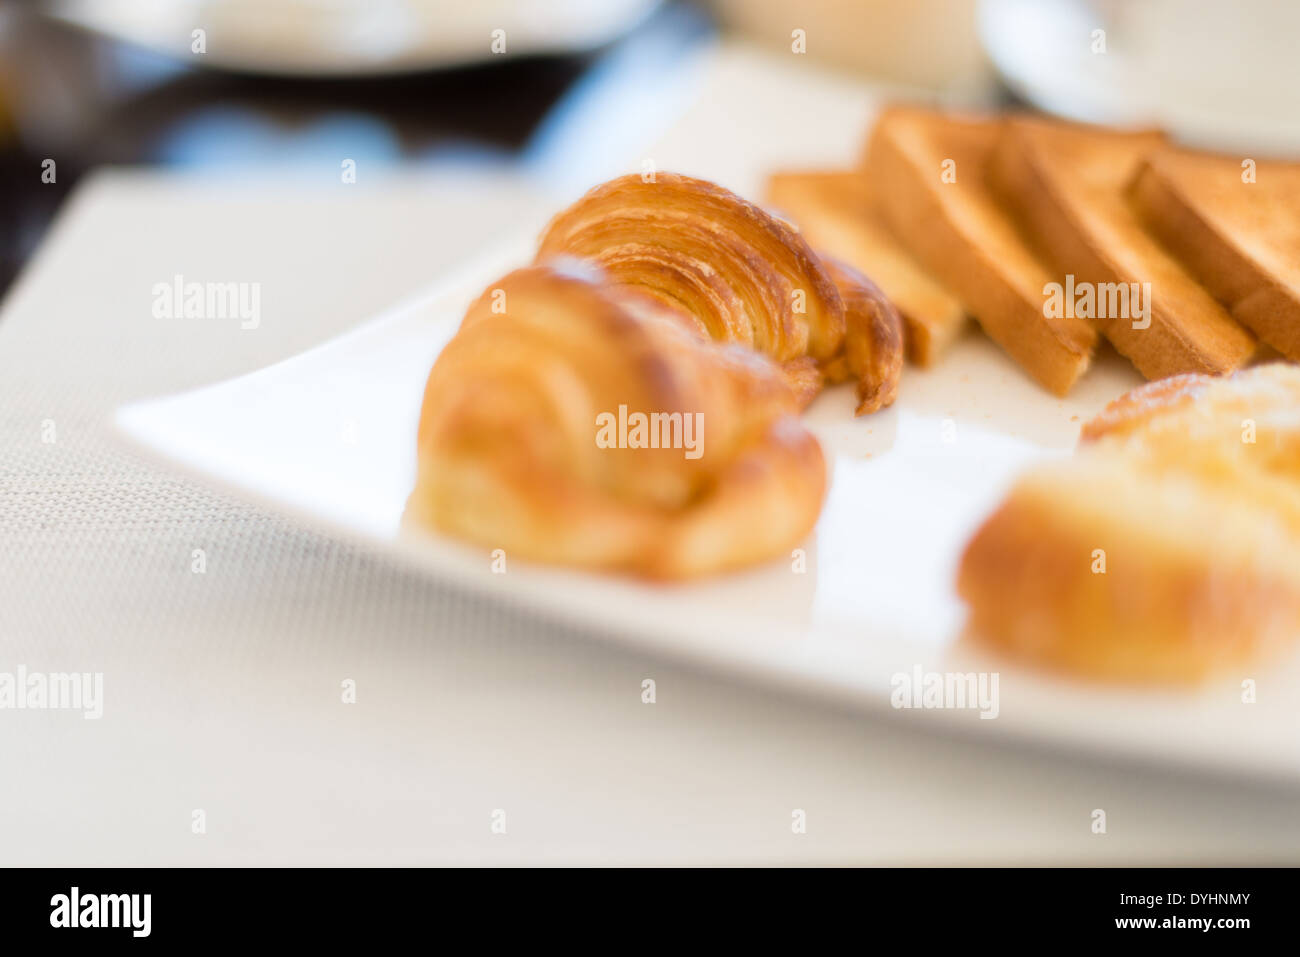 Close-up view of tasty croissants and toasts on square plate served on table with white mat. Fresh appetizing pastry with crisp. Stock Photo